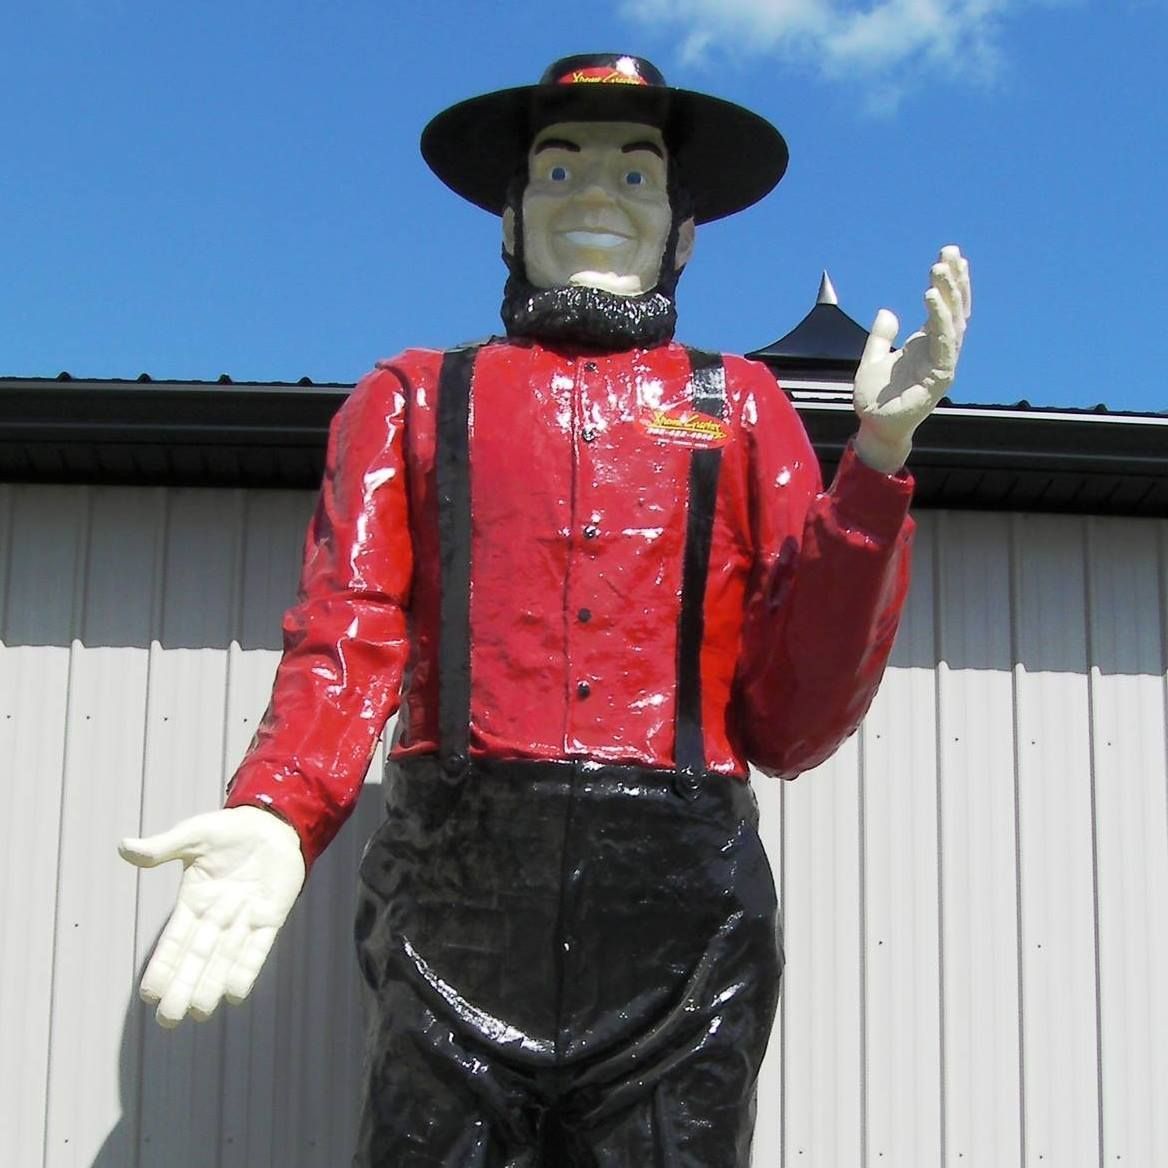 World's Largest Amish Man Statue, world record in Milford, Delaware